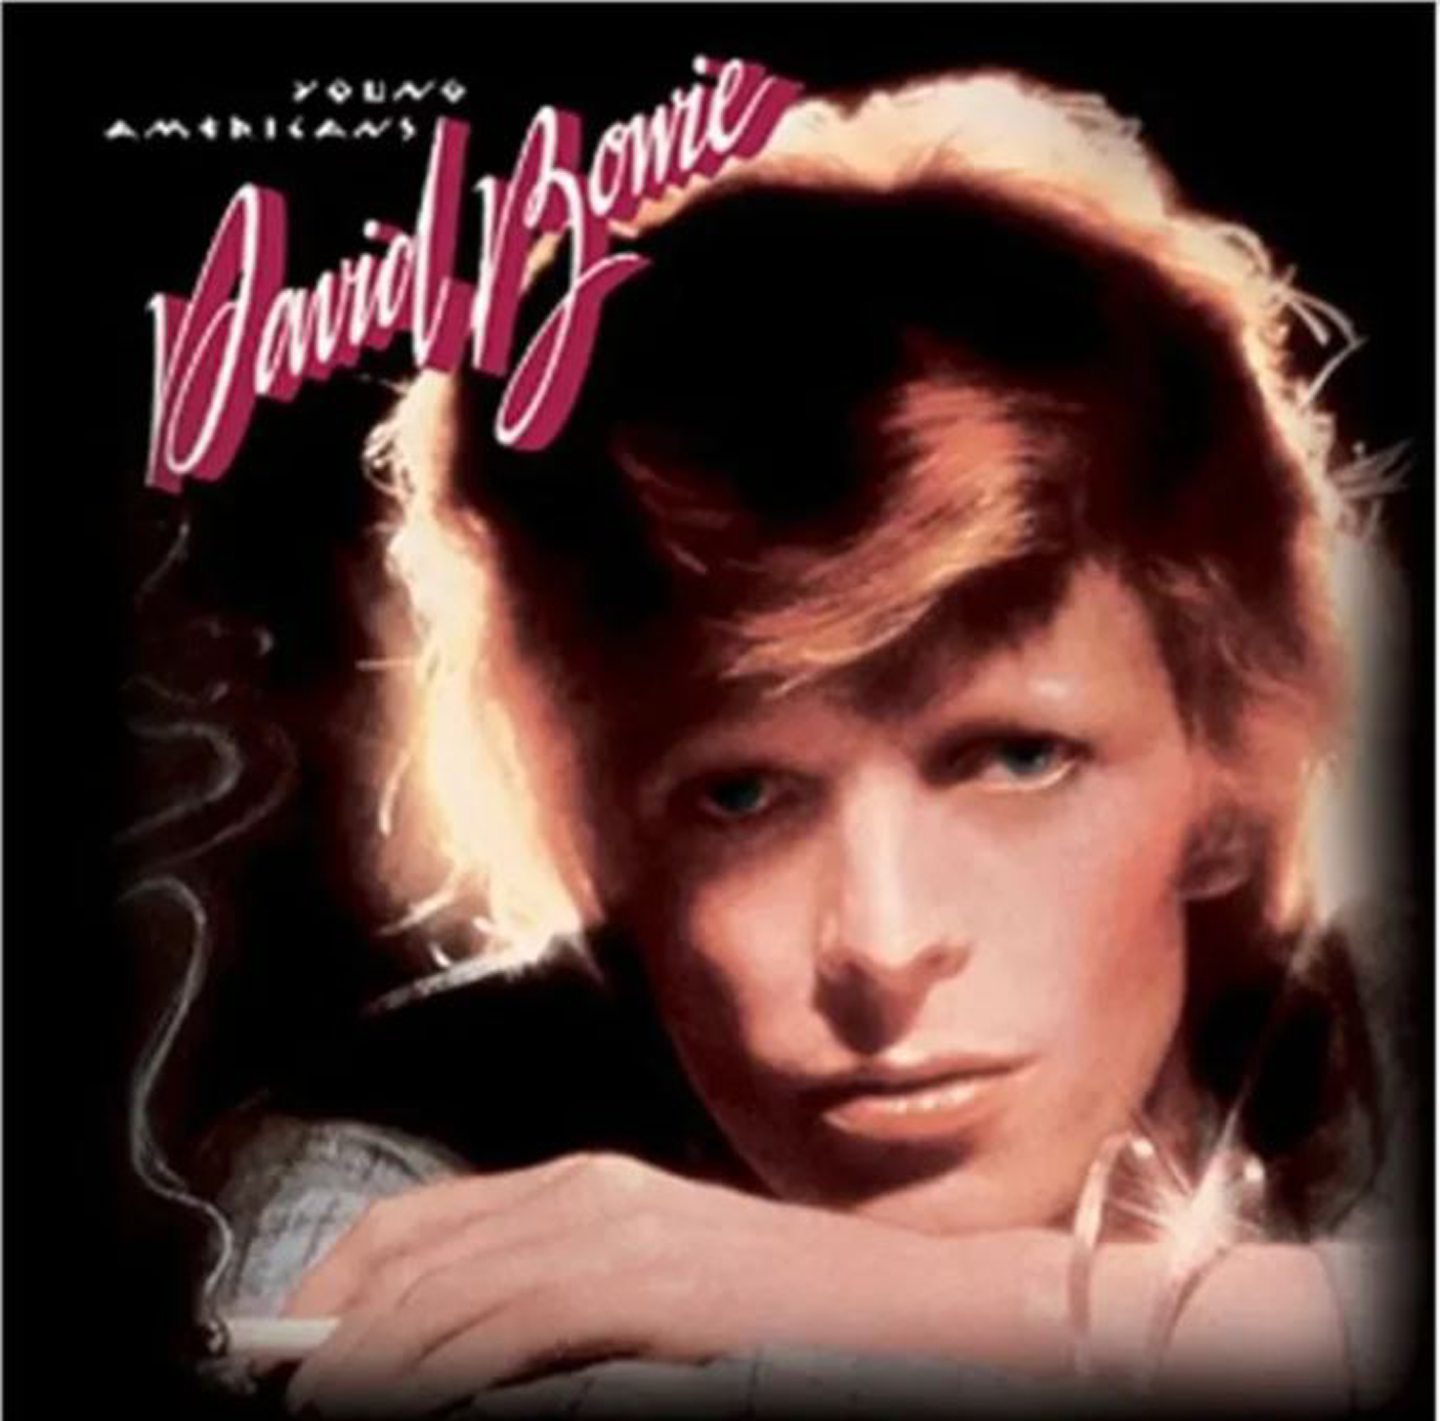 David Bowie's Young Americans cover